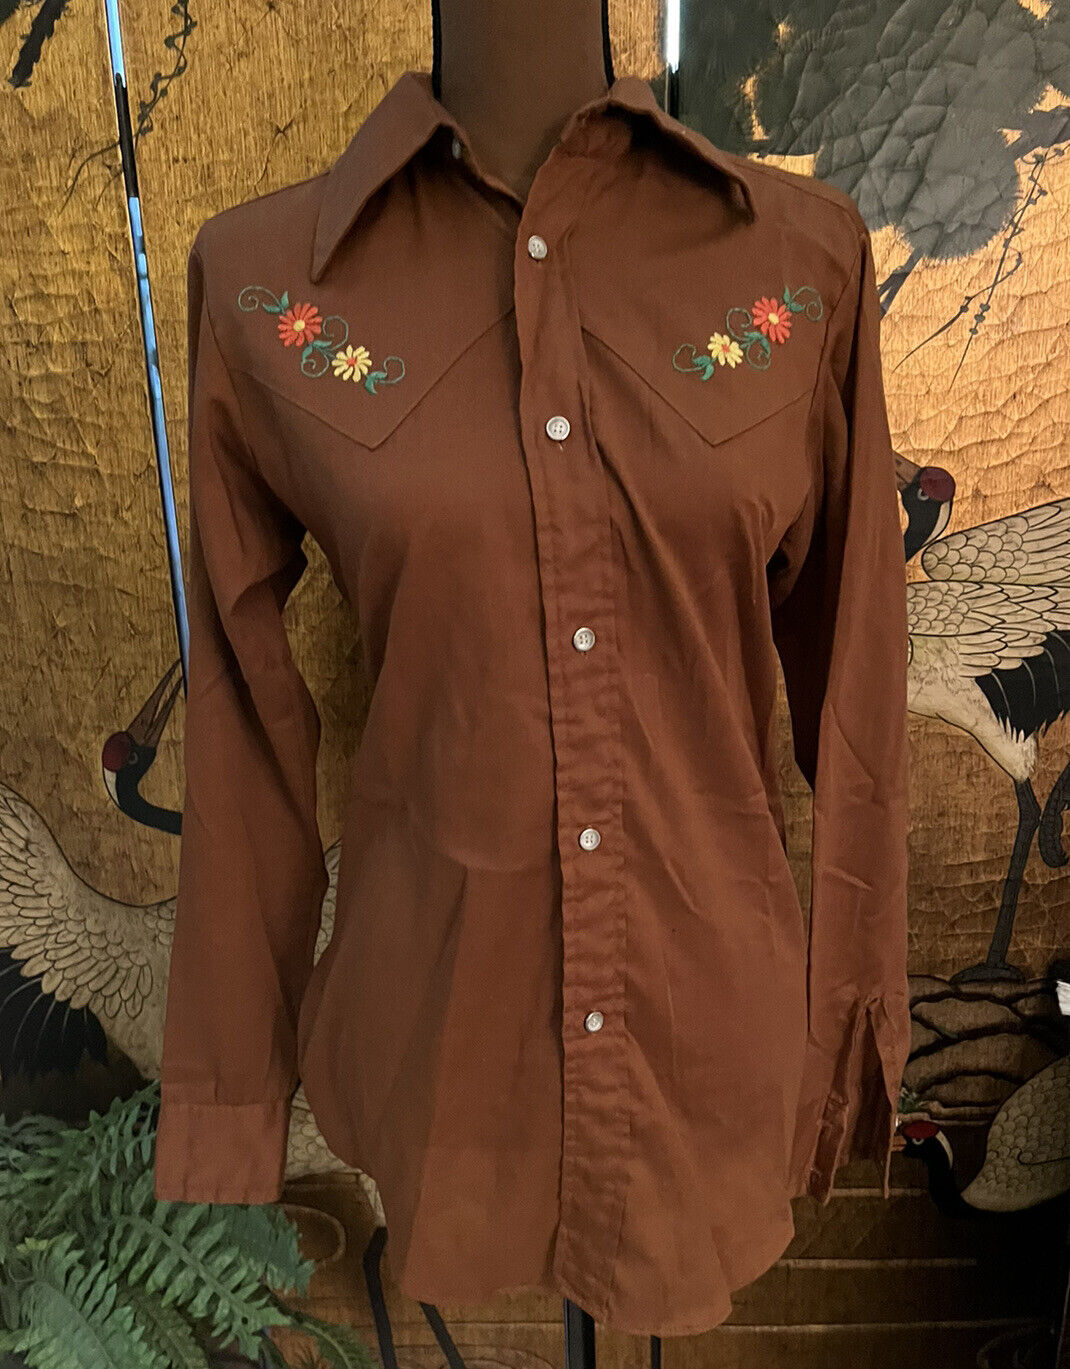 vintage 70s embroidered brown floral county seat western cowboy shirt